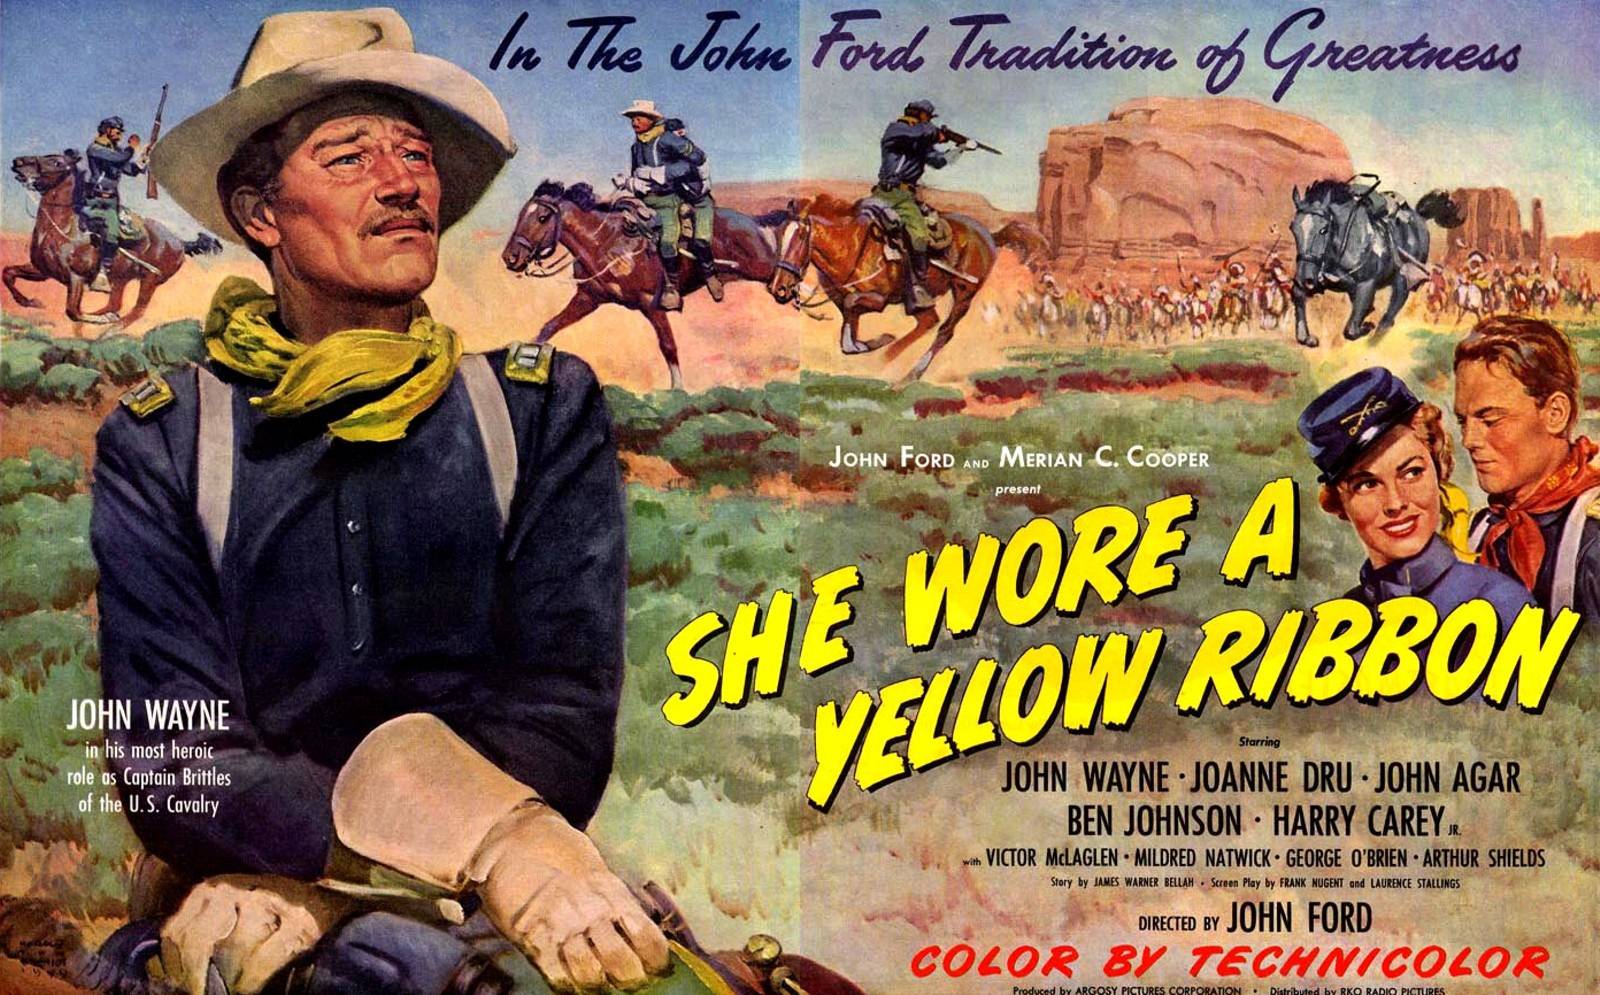  Yellow Ribbon is a 1949 American western film directed by John Ford